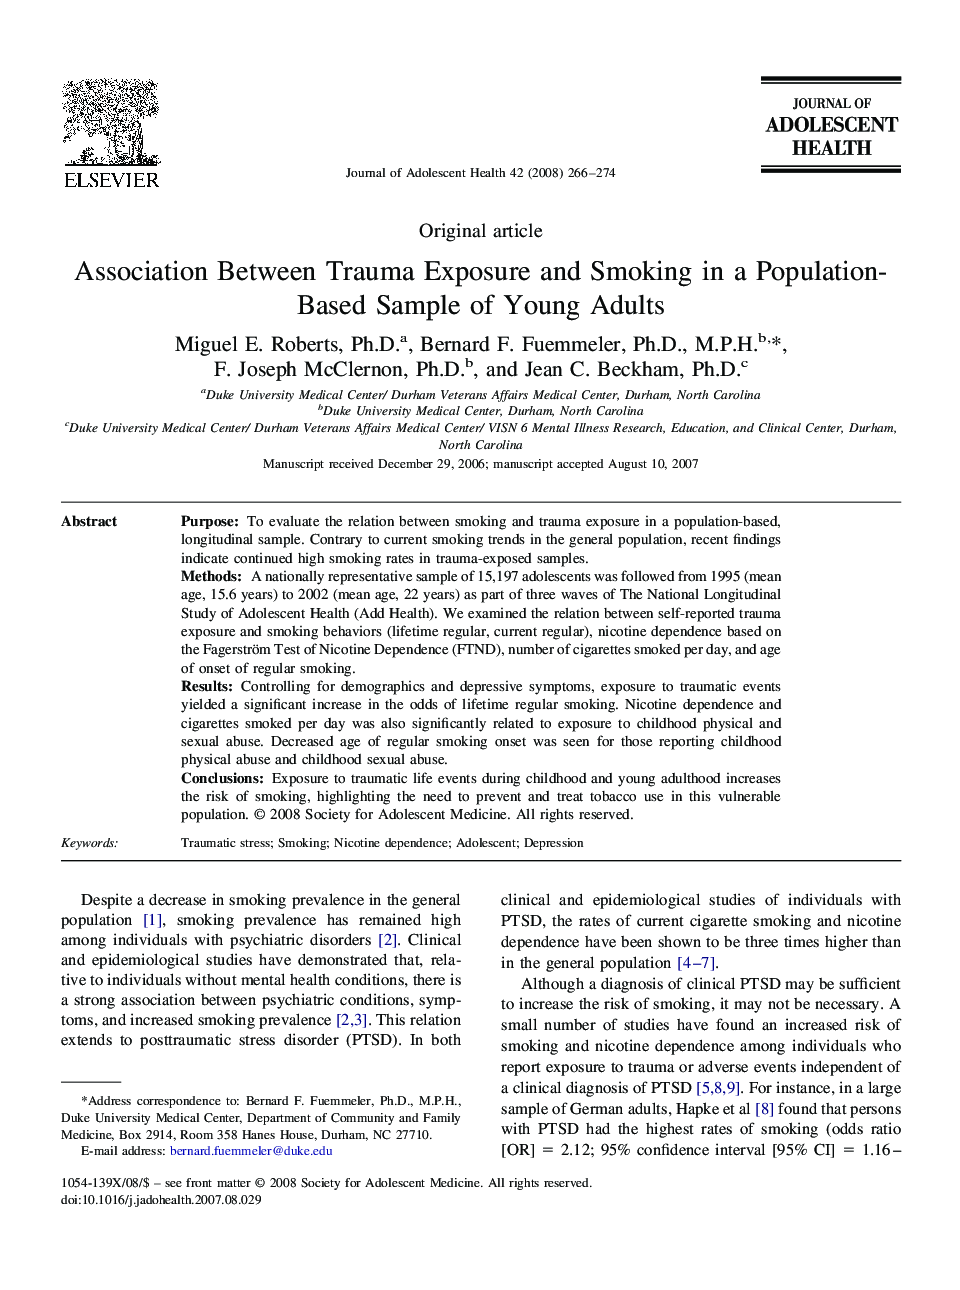 Association Between Trauma Exposure and Smoking in a Population-Based Sample of Young Adults